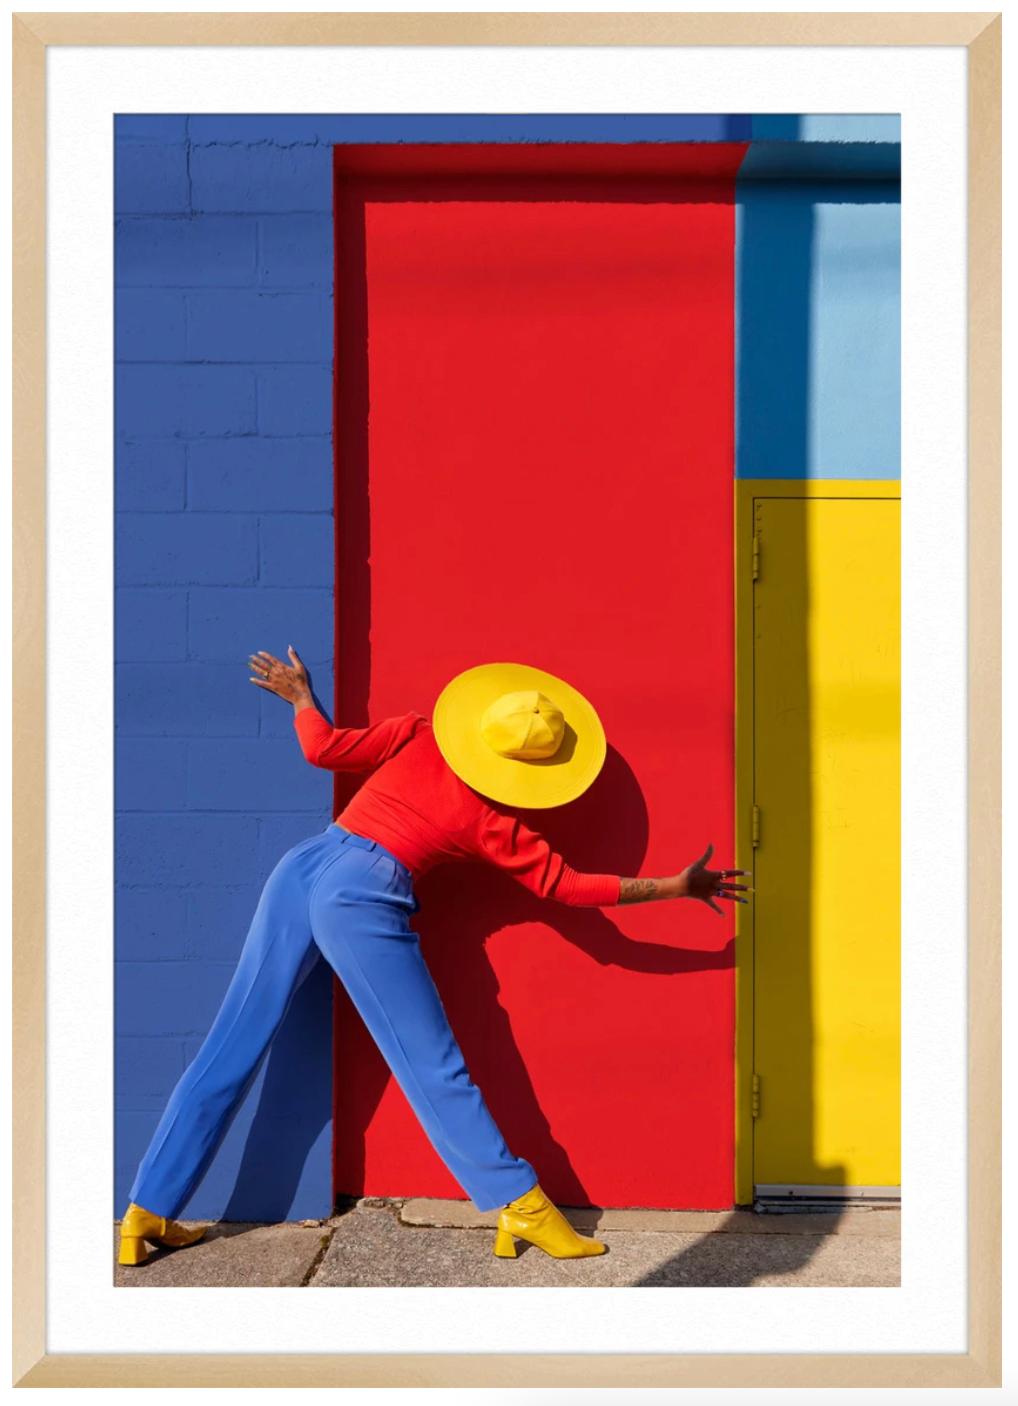 ABOUT THIS ARTIST: Tropico Photo is the collaborative work of Forrest Aguar and Michelle Norris. Forrest loves pairing shapes and lines to create captivating compositions and Michelle loves seeking out compelling color combinations. Together, they